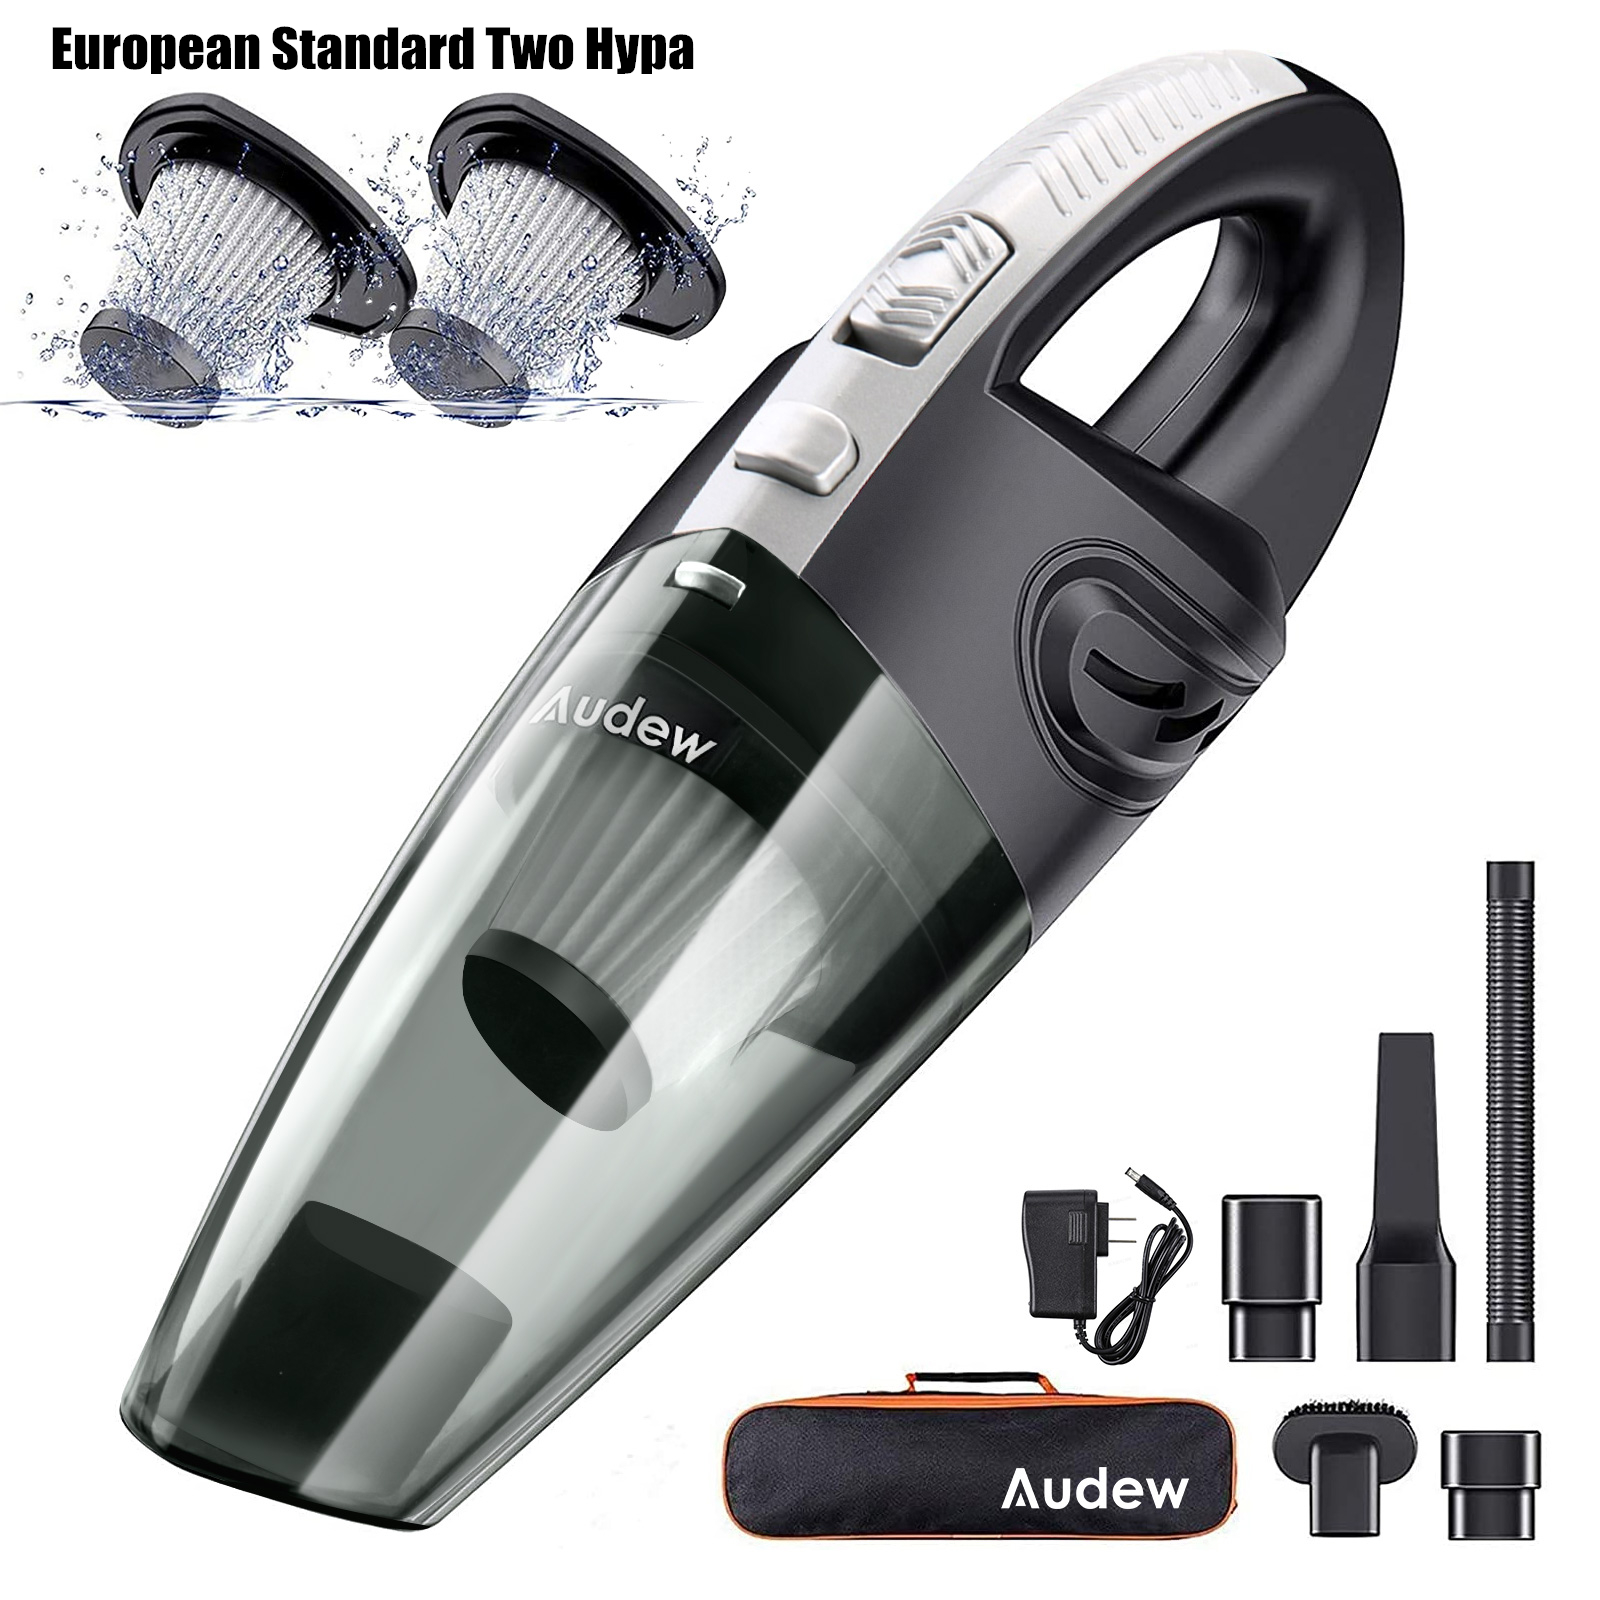 AUDEW 120W 5000Pa Cordless Vacuum Cleaner Handheld Rechargeable Wet/Dry for Car and Home - Auto GoShop